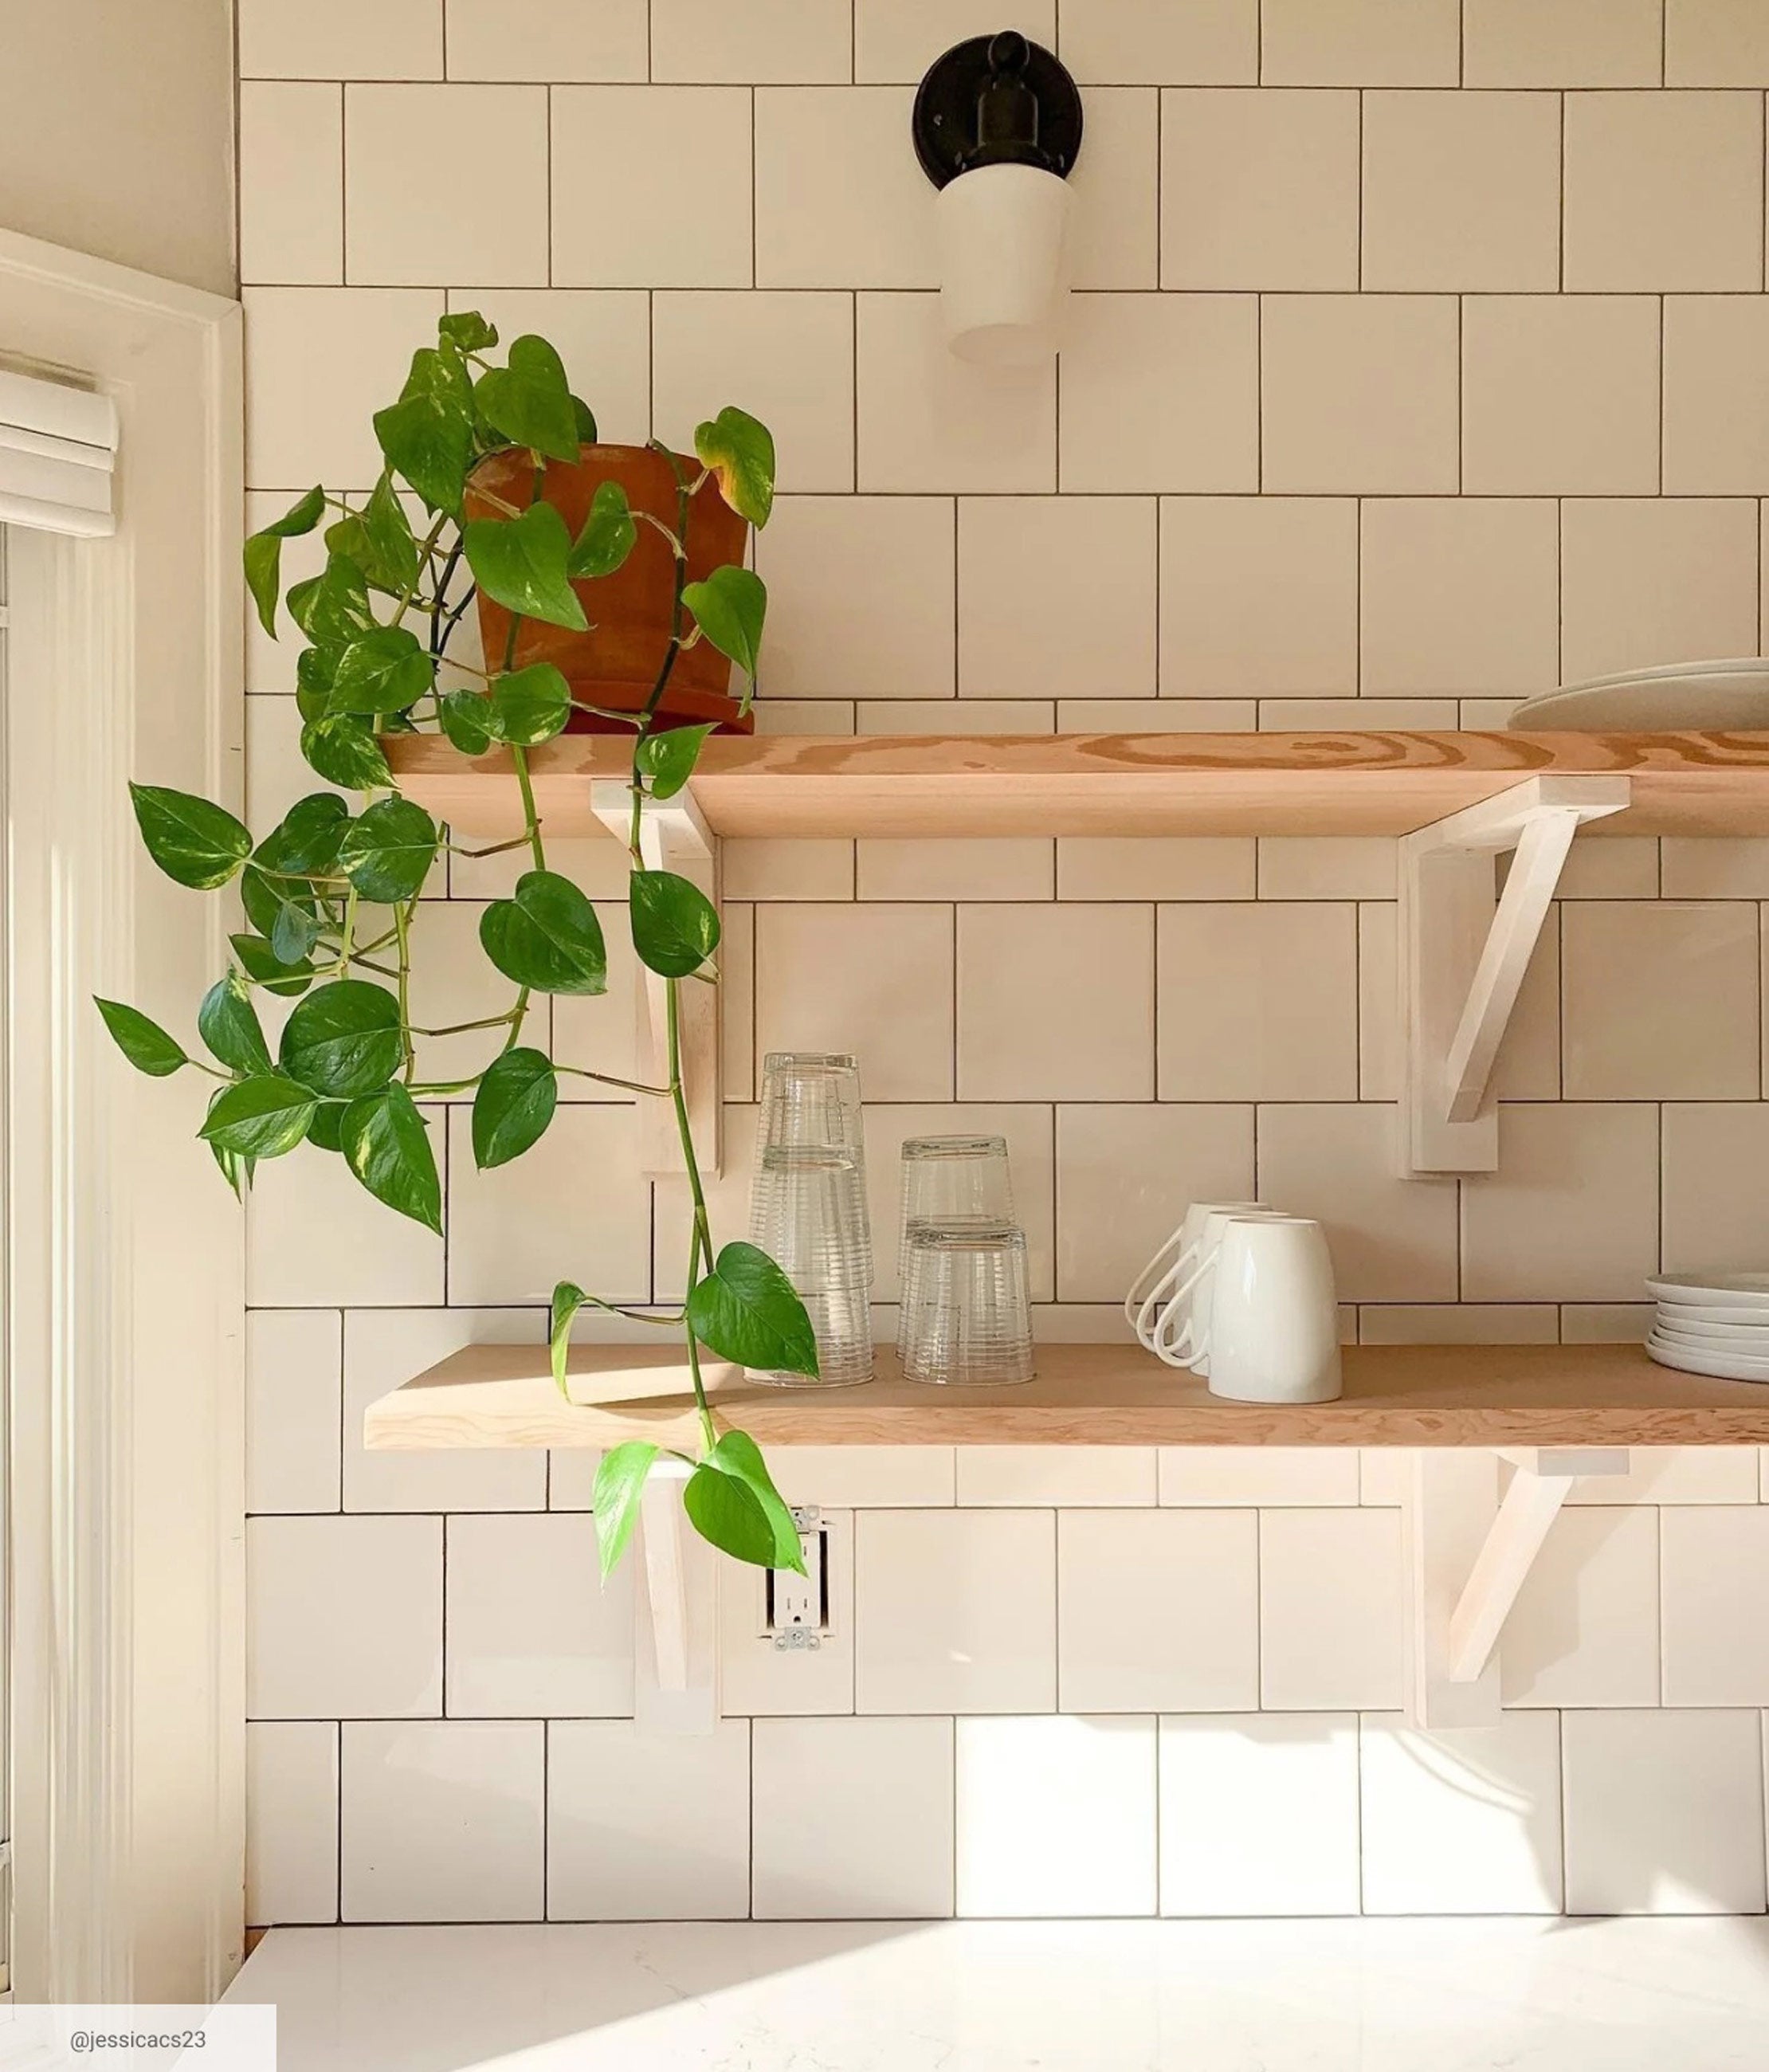 Sunny kitchen with subway tile and open shelves holding glassware and a potted pothos plant.